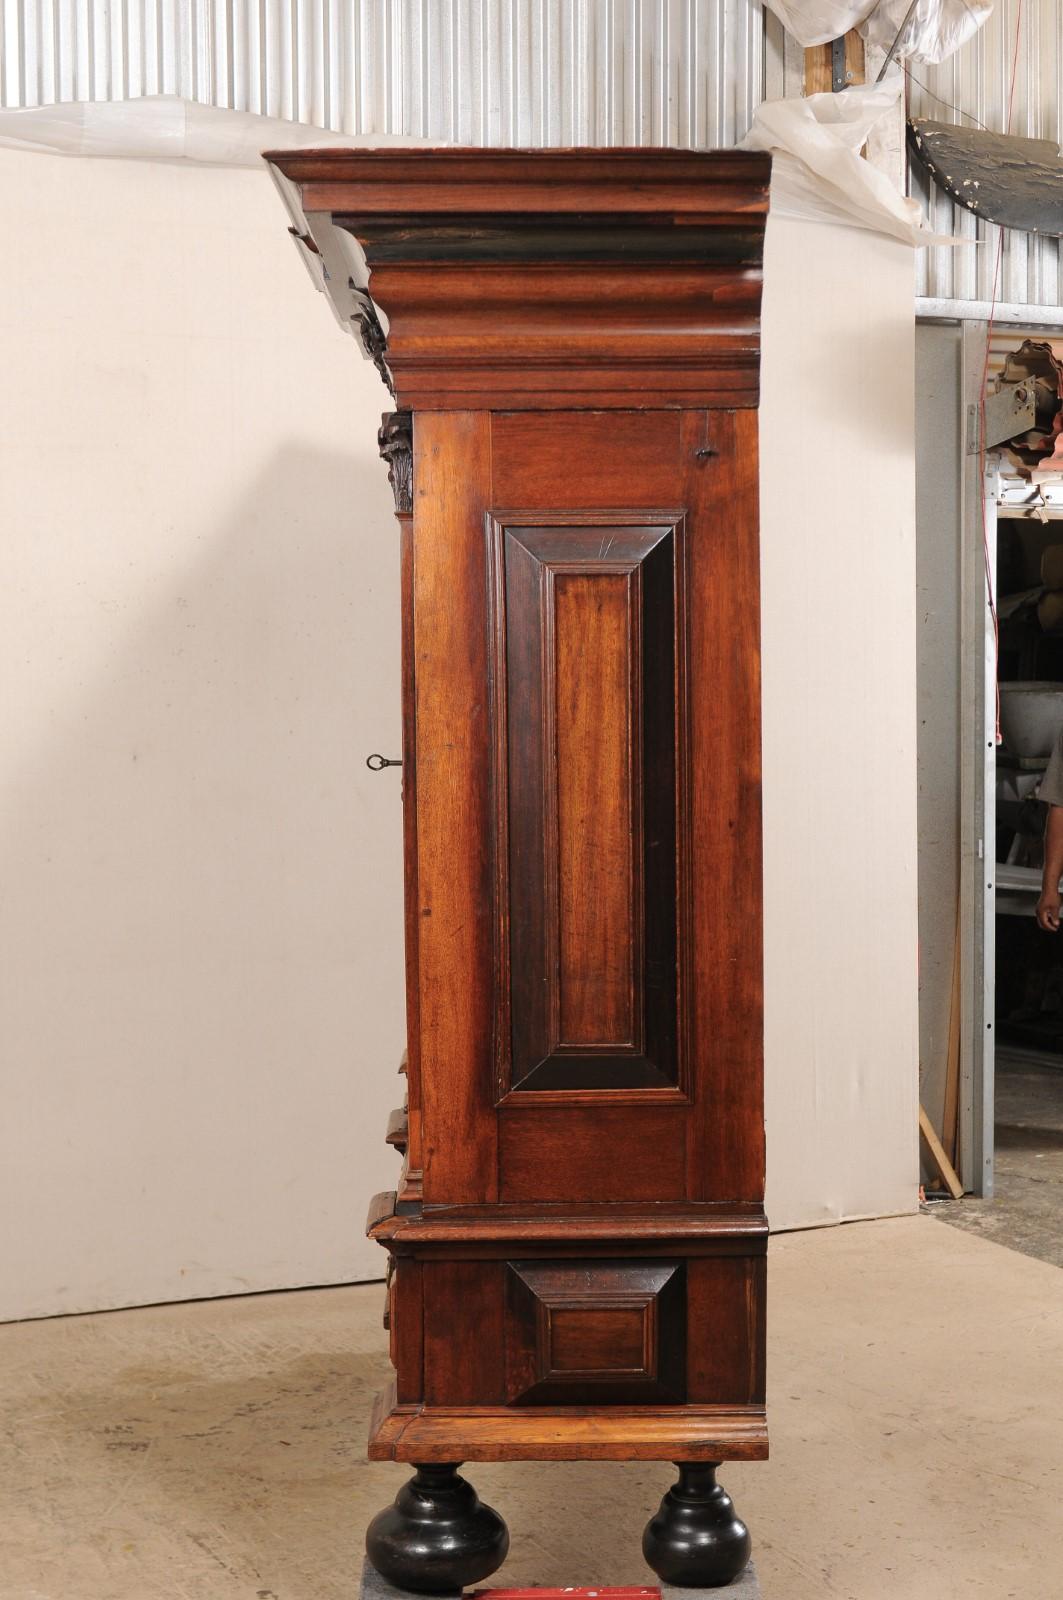 An Early 18th Century Swedish Period Baroque Kas Cabinet with Ebonized Accents For Sale 4